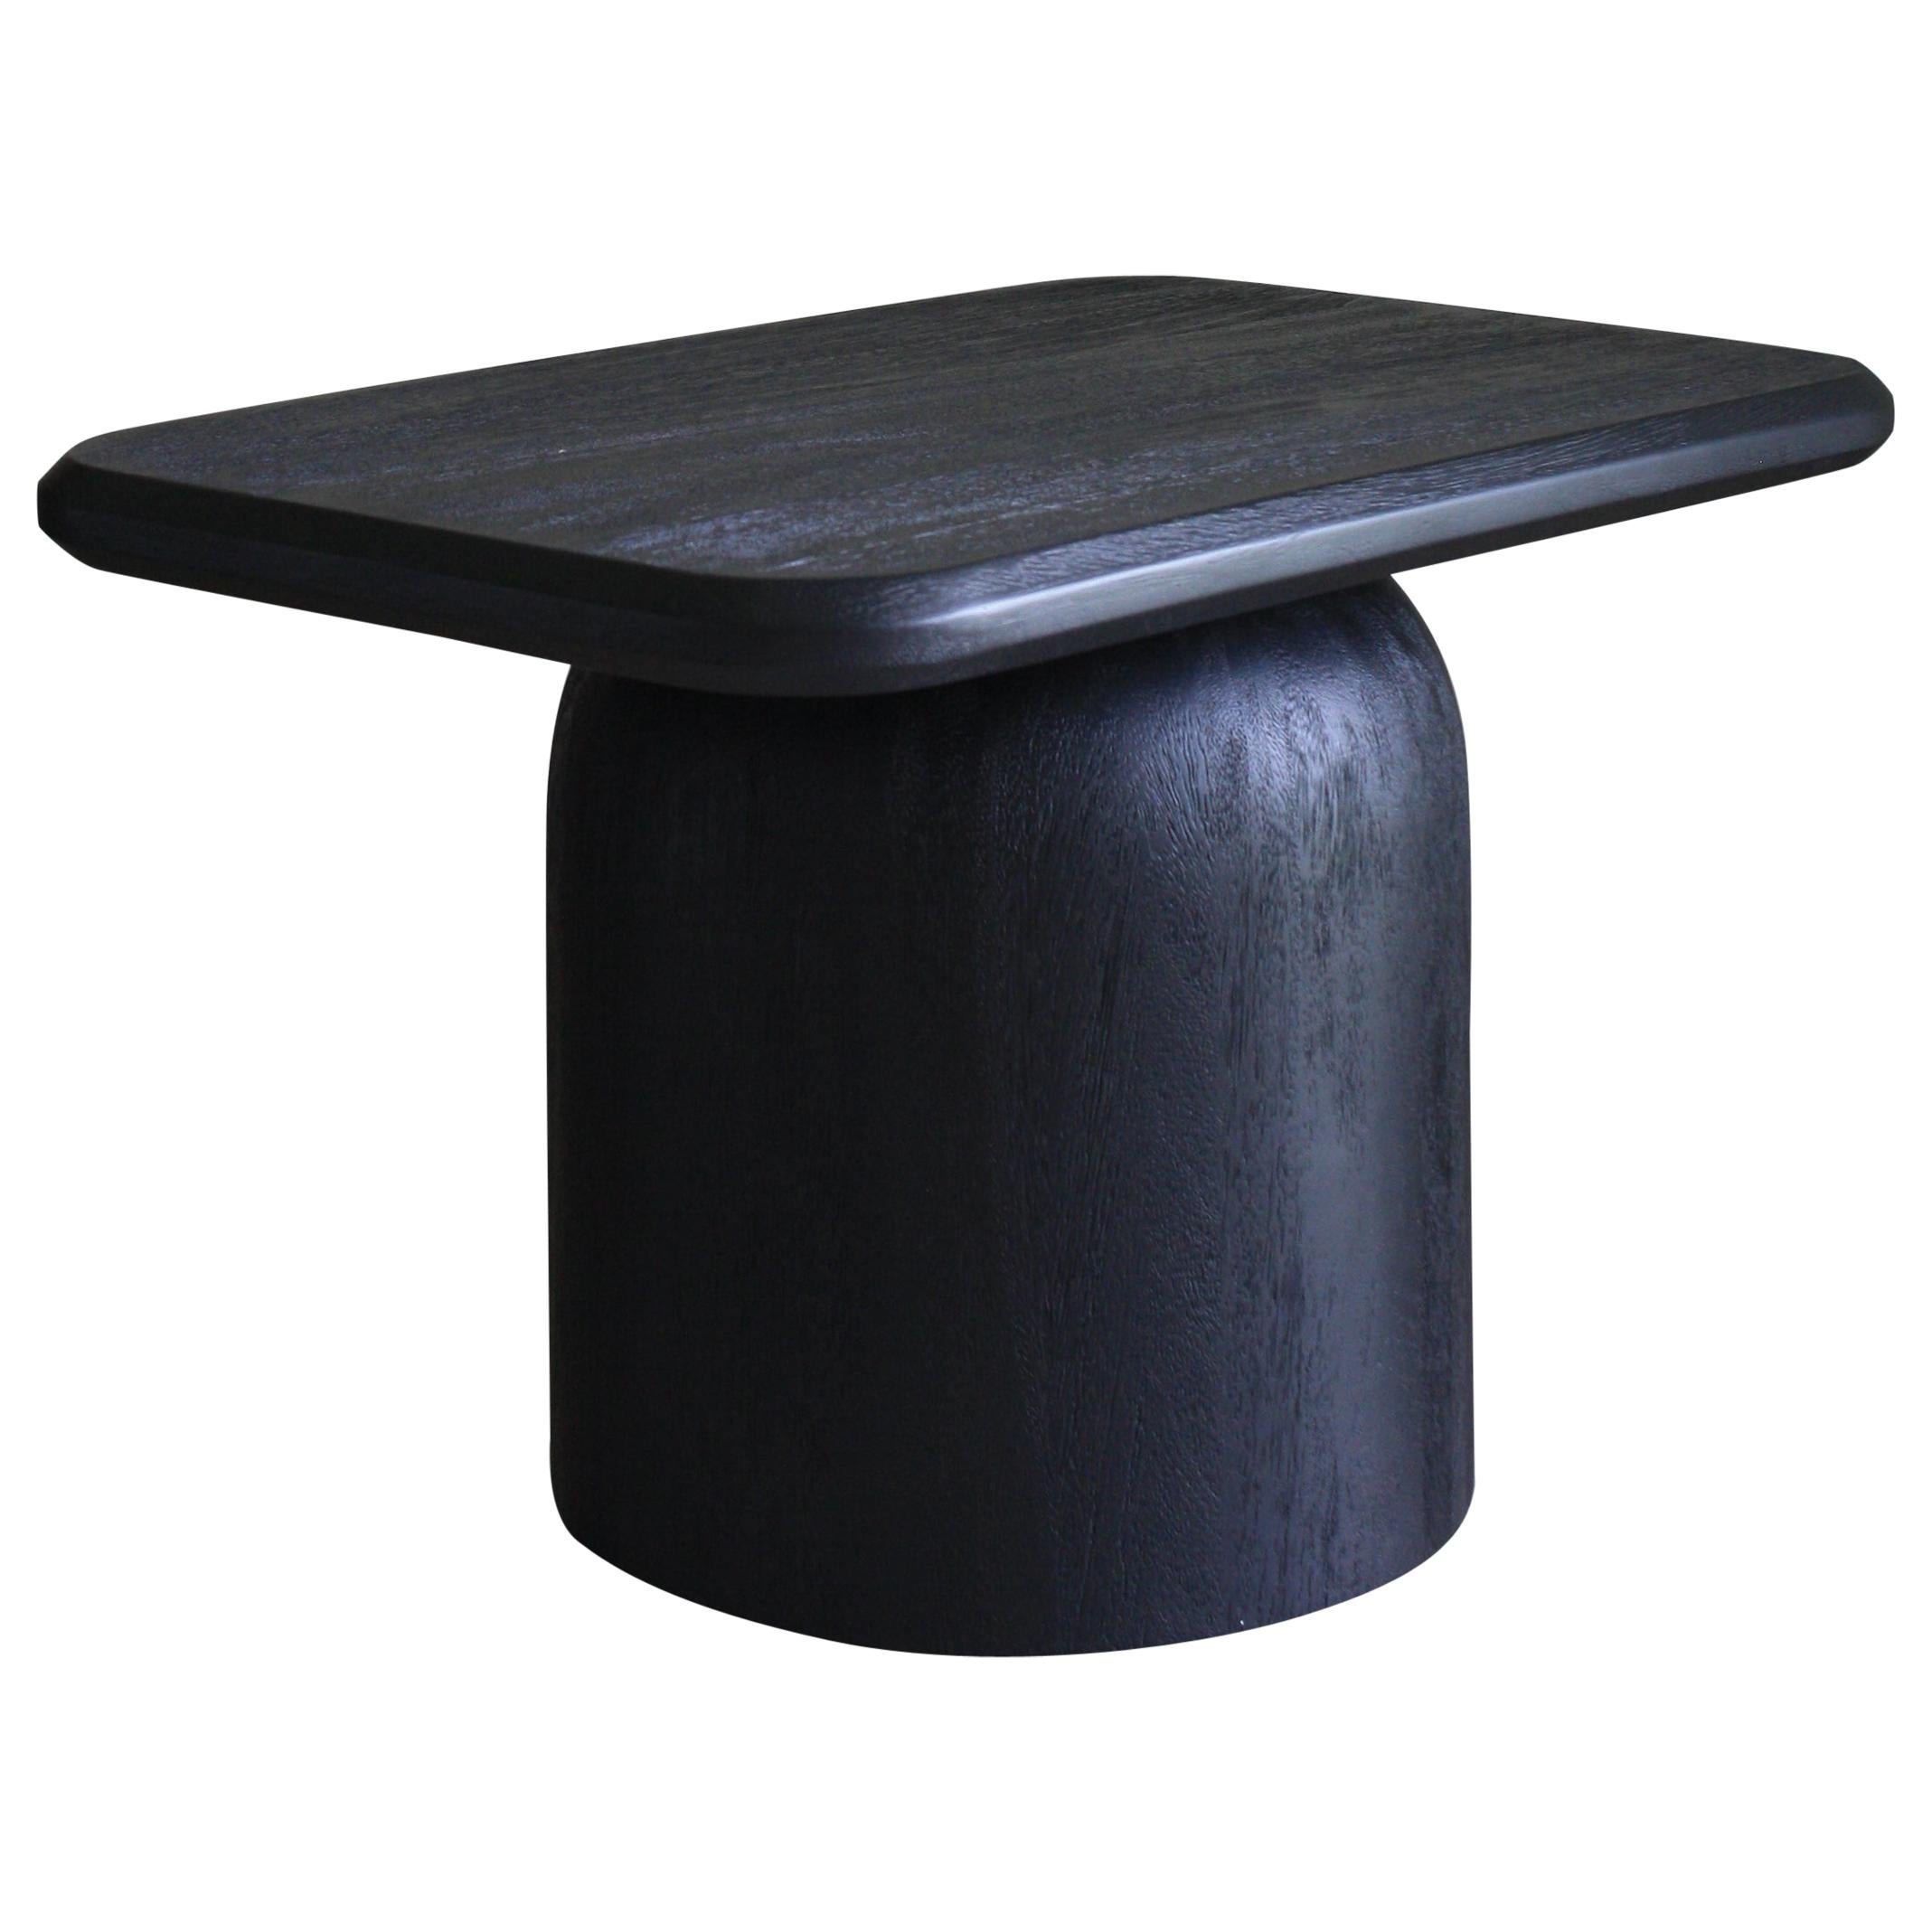 Black stained Conacaste wood hollow center for weight in base and solid wood top.

Part of Labrica's Arco collection was inspired by Spanish Colonial Architecture found in Antigua Guatemala.

We played with architectural elements such as arches